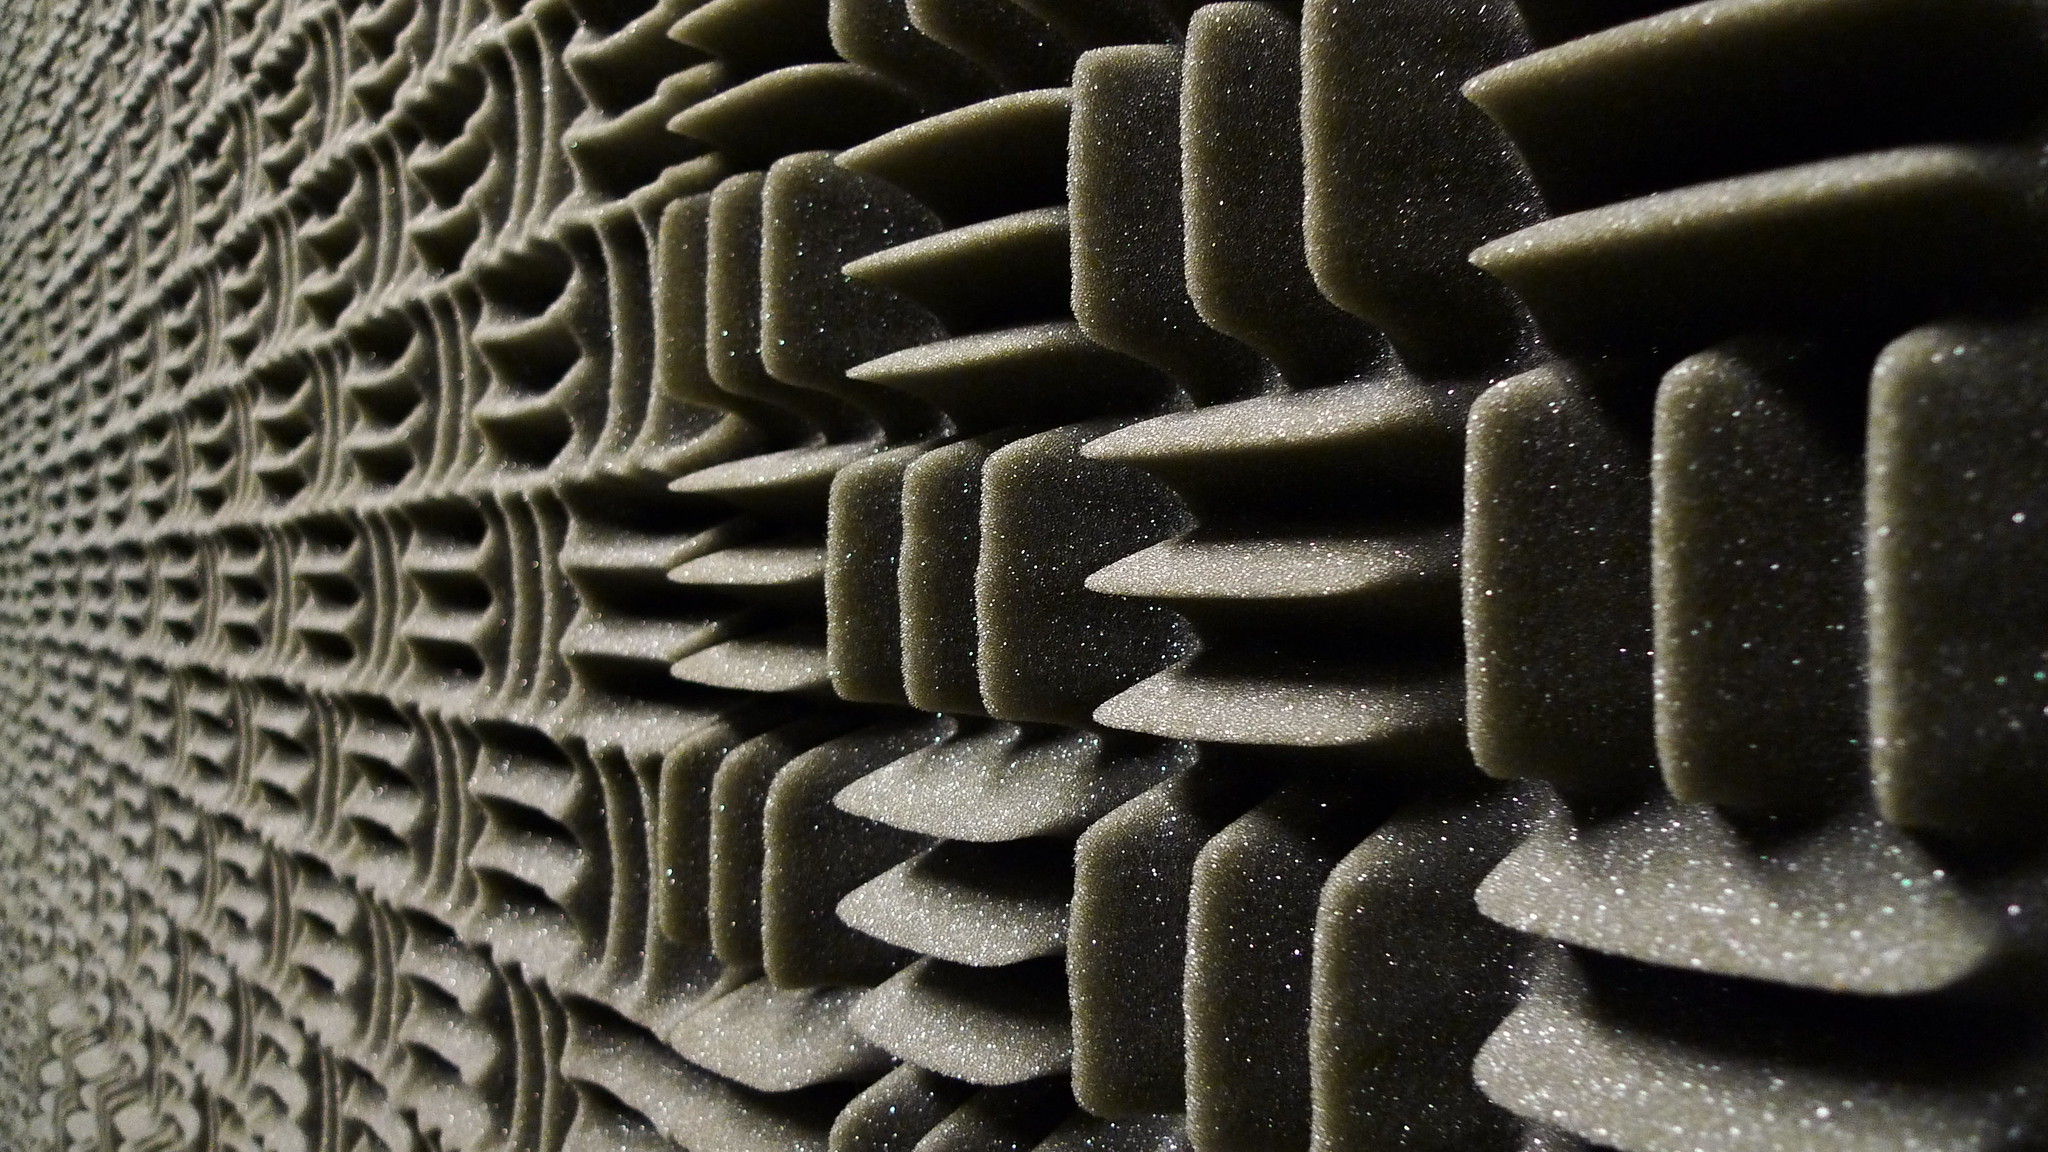 What Is The Difference Between Soundproofing And Acoustic Treatment